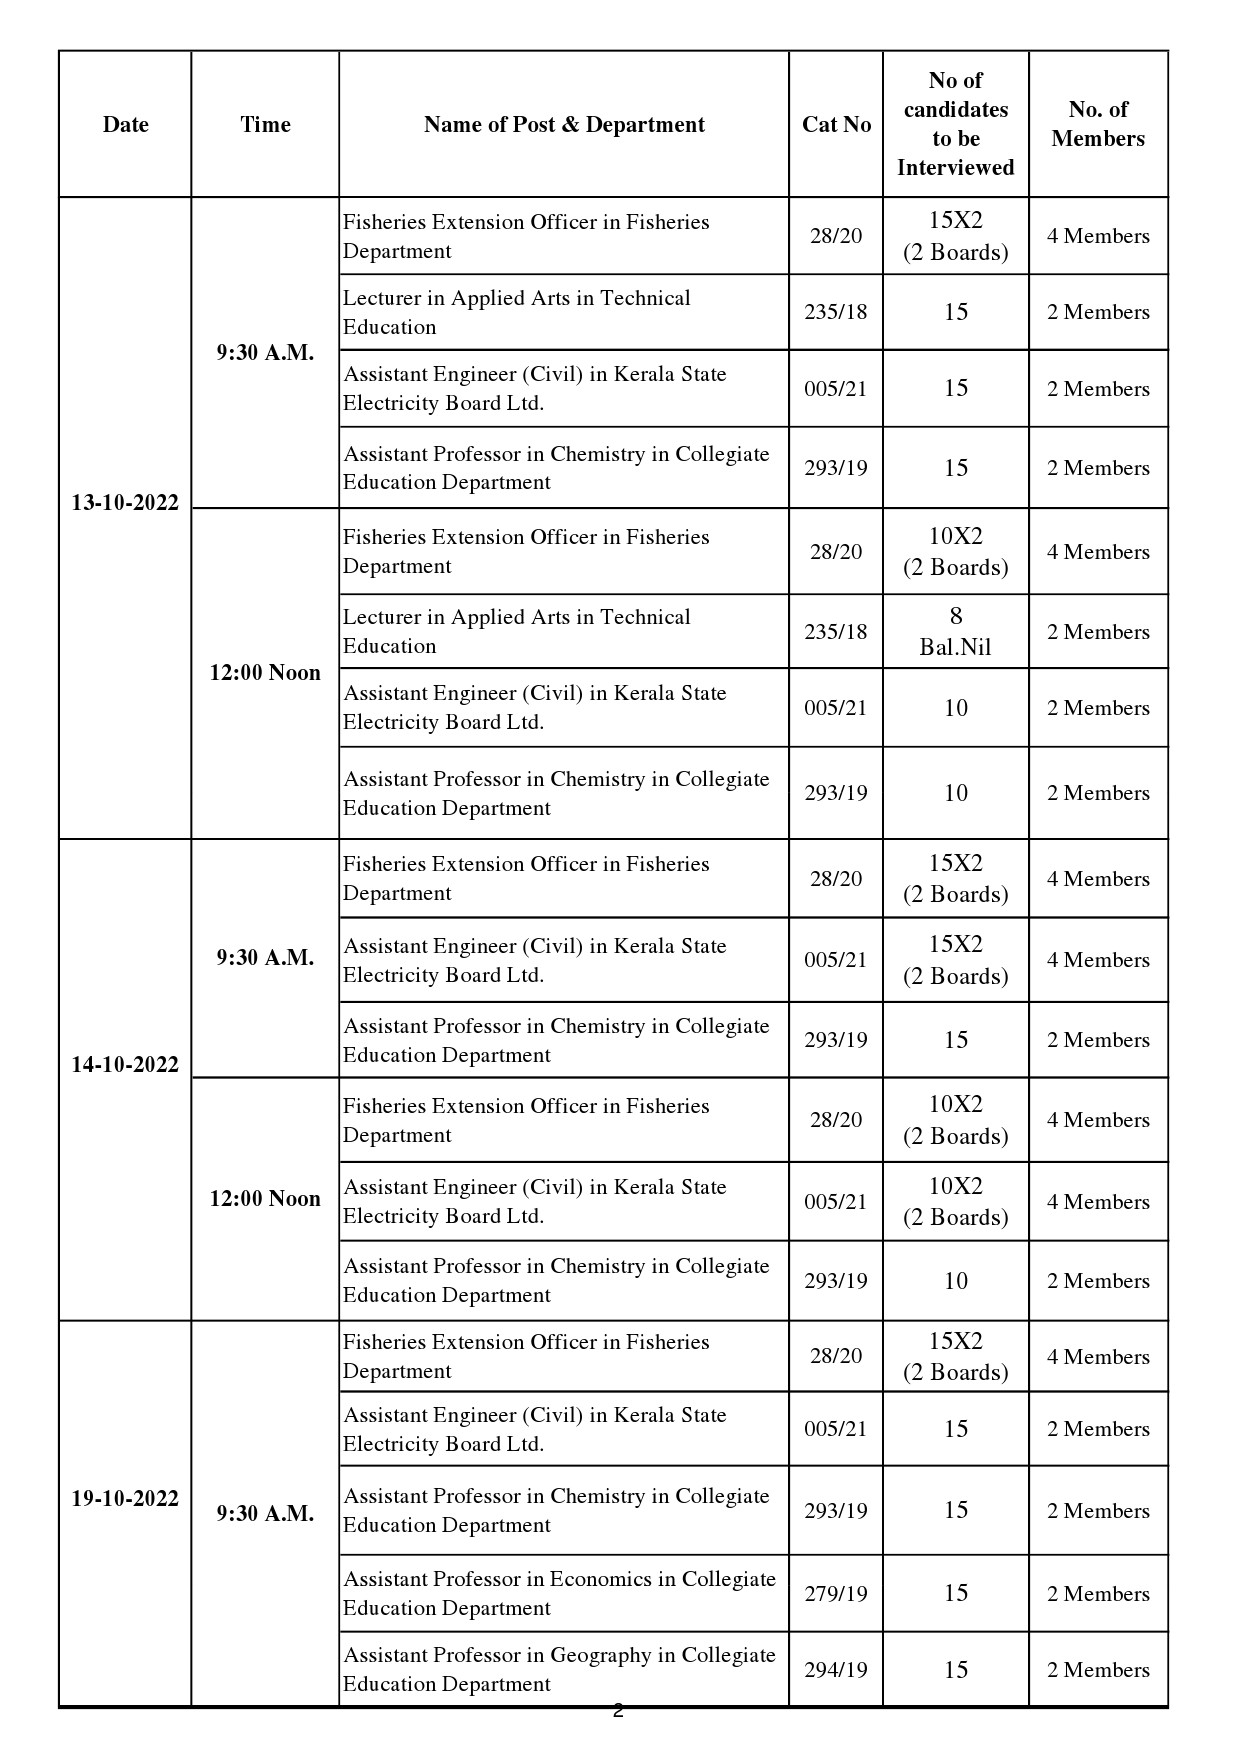 INTERVIEW PROGRAMME FOR THE MONTH OF OCTOBER 2022 - Notification Image 2